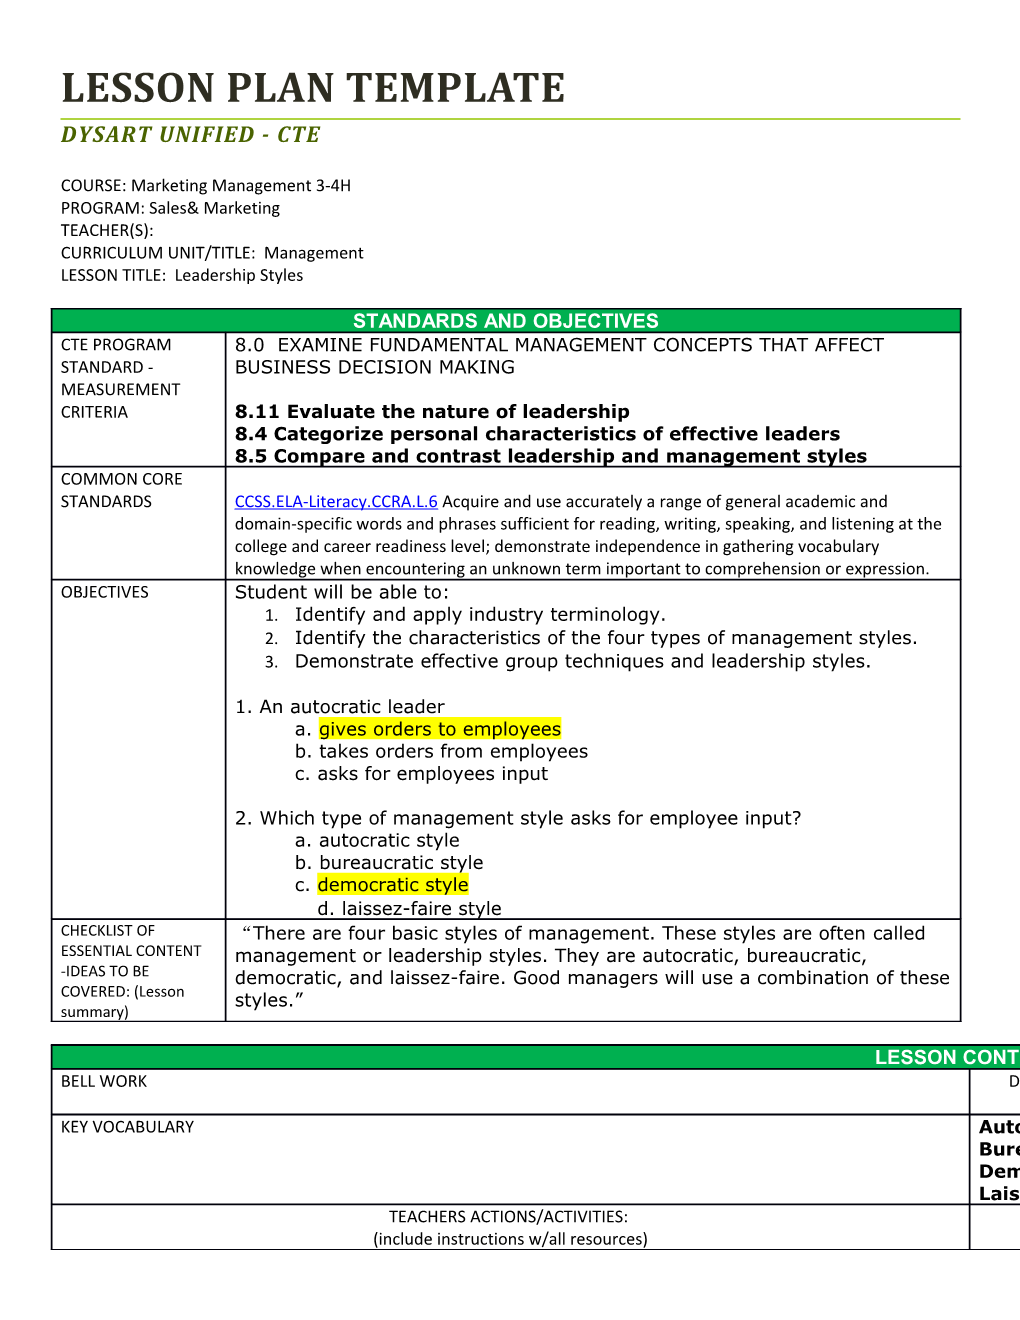 Lesson Plan Template s43